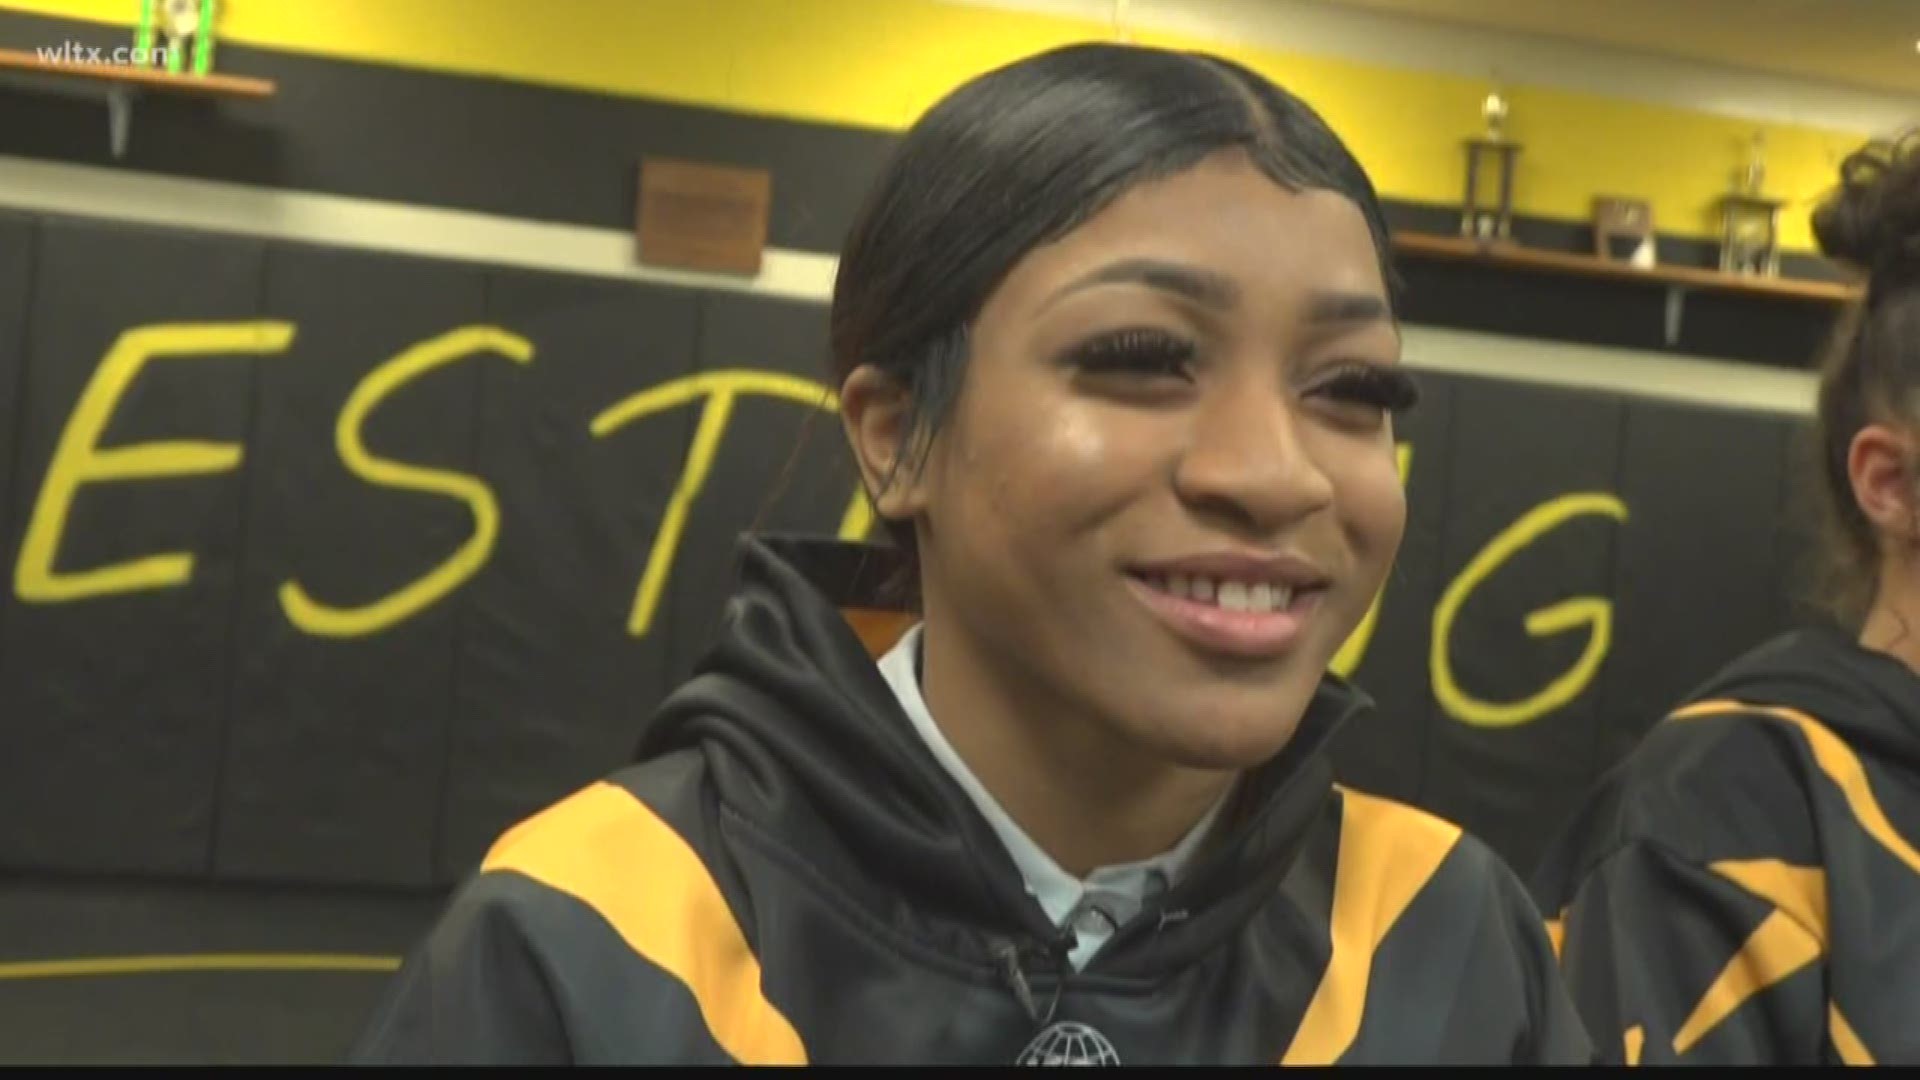 Mya'ah Vincent is a sophomore at Irmo High School, earlier this month she won the state championship for wrestling.